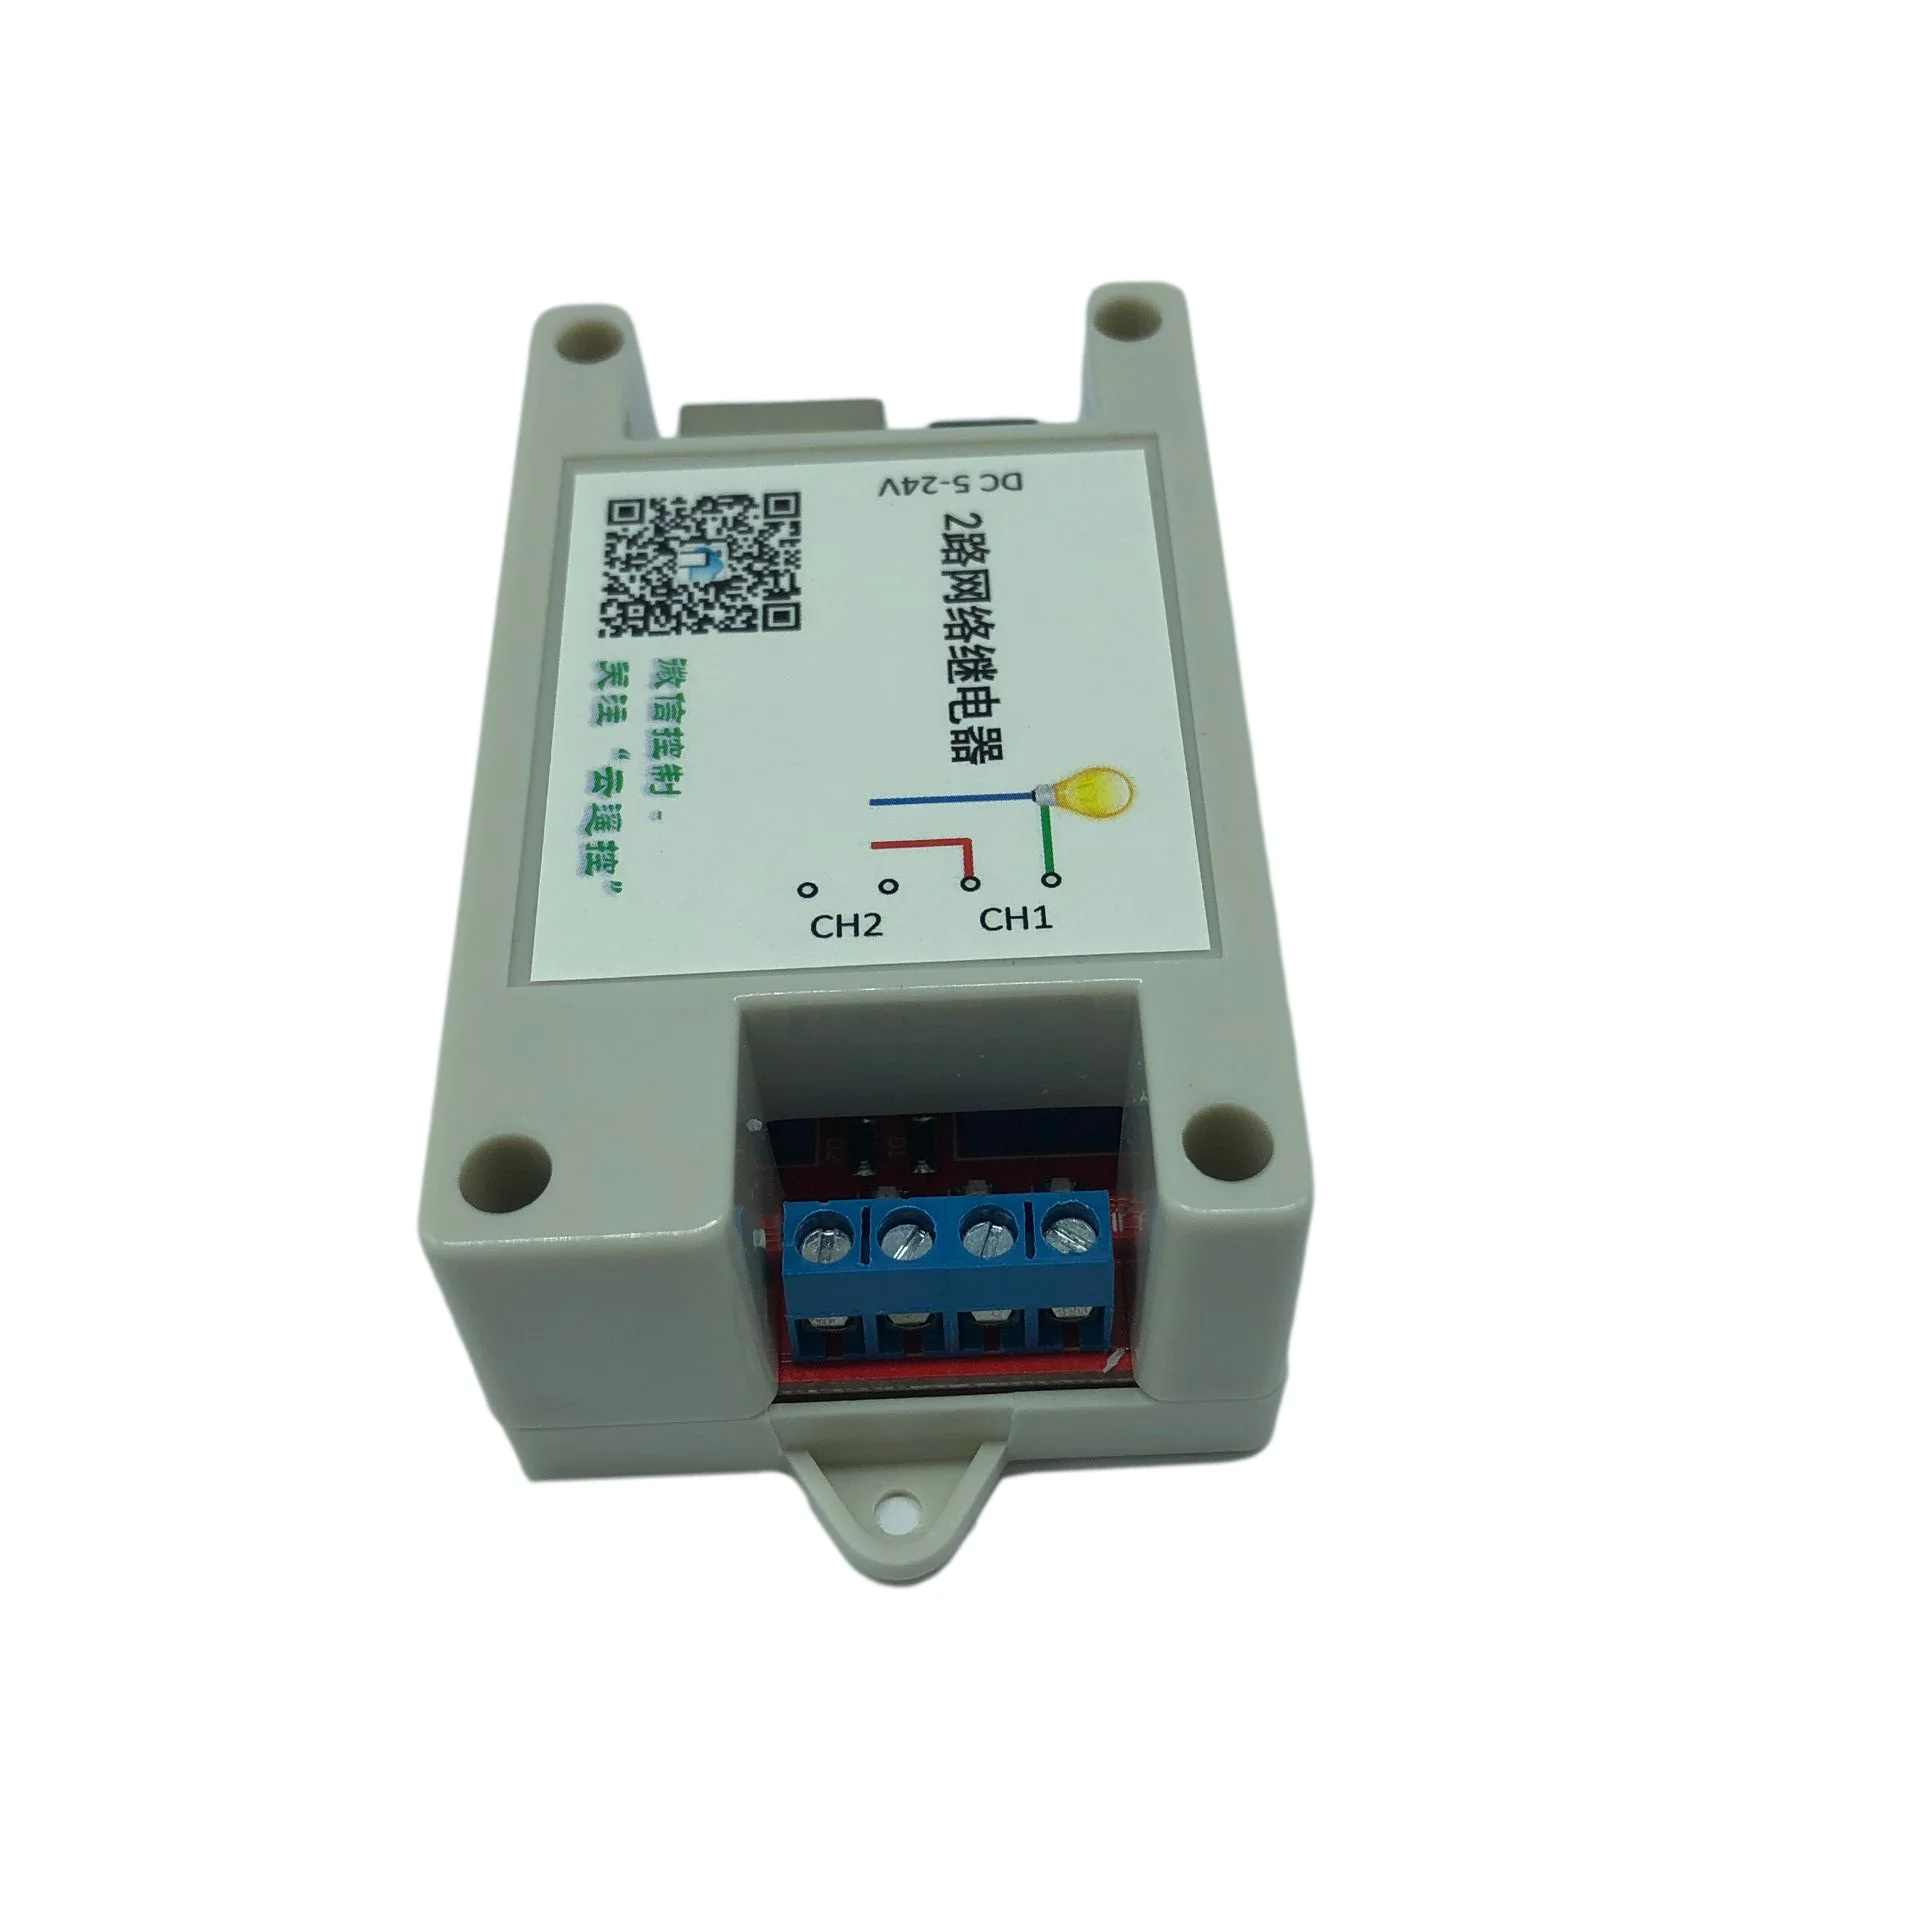 WeChat cloud remote control 2 Ethernet relay with case  2 normally open contact network switch   network switch delay TCPUDP